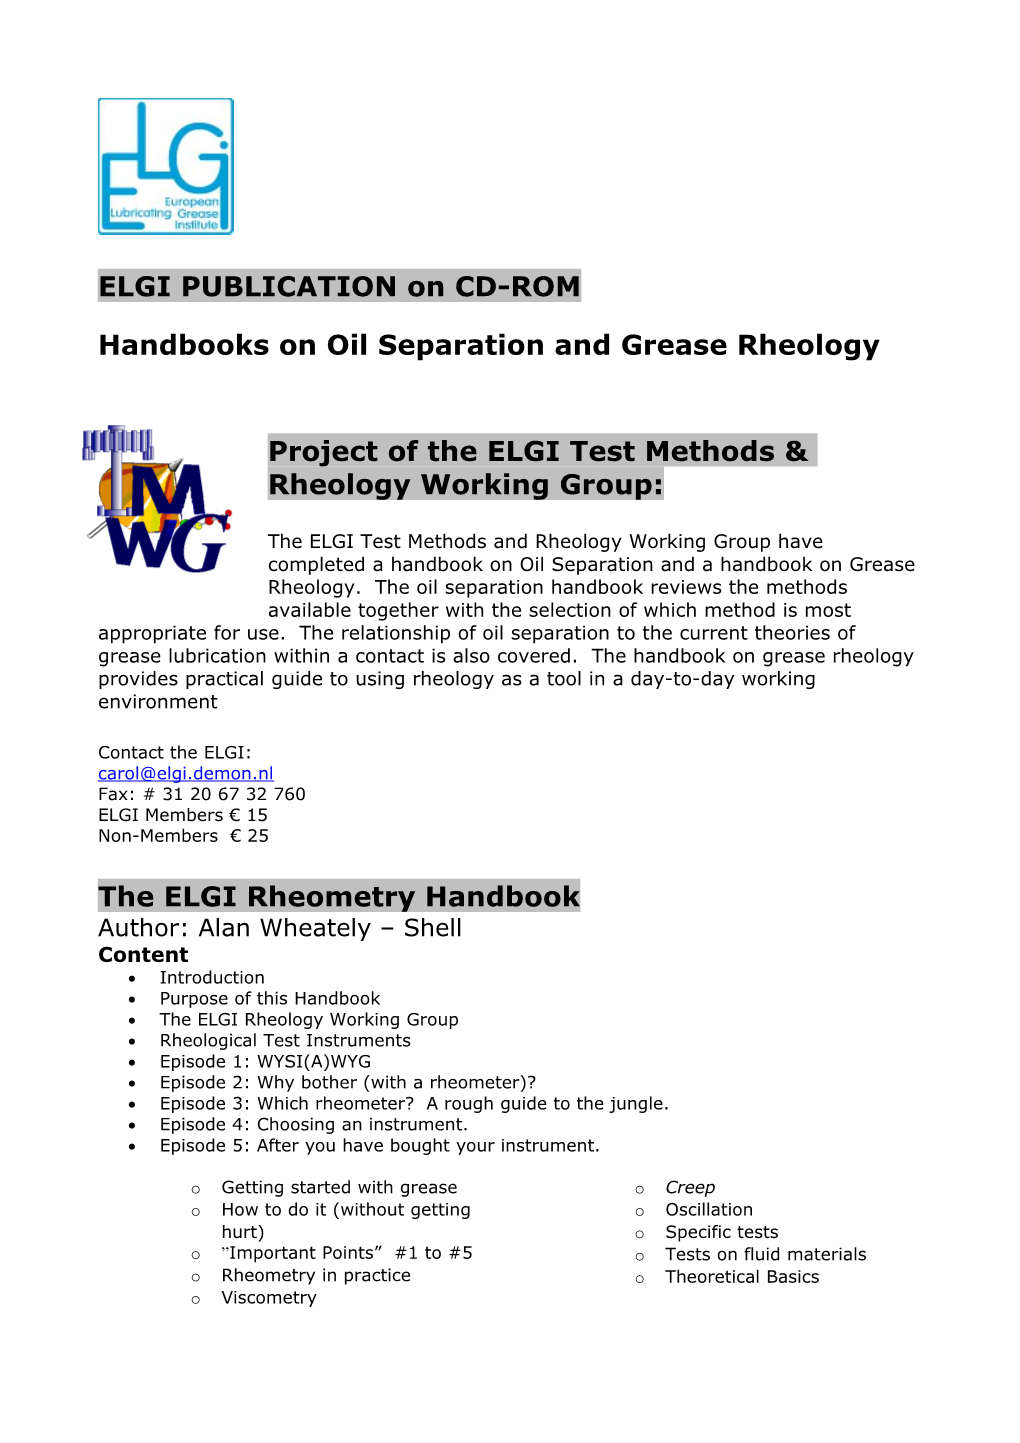 Project of the ELGI Test Methods & Rheology Working Group